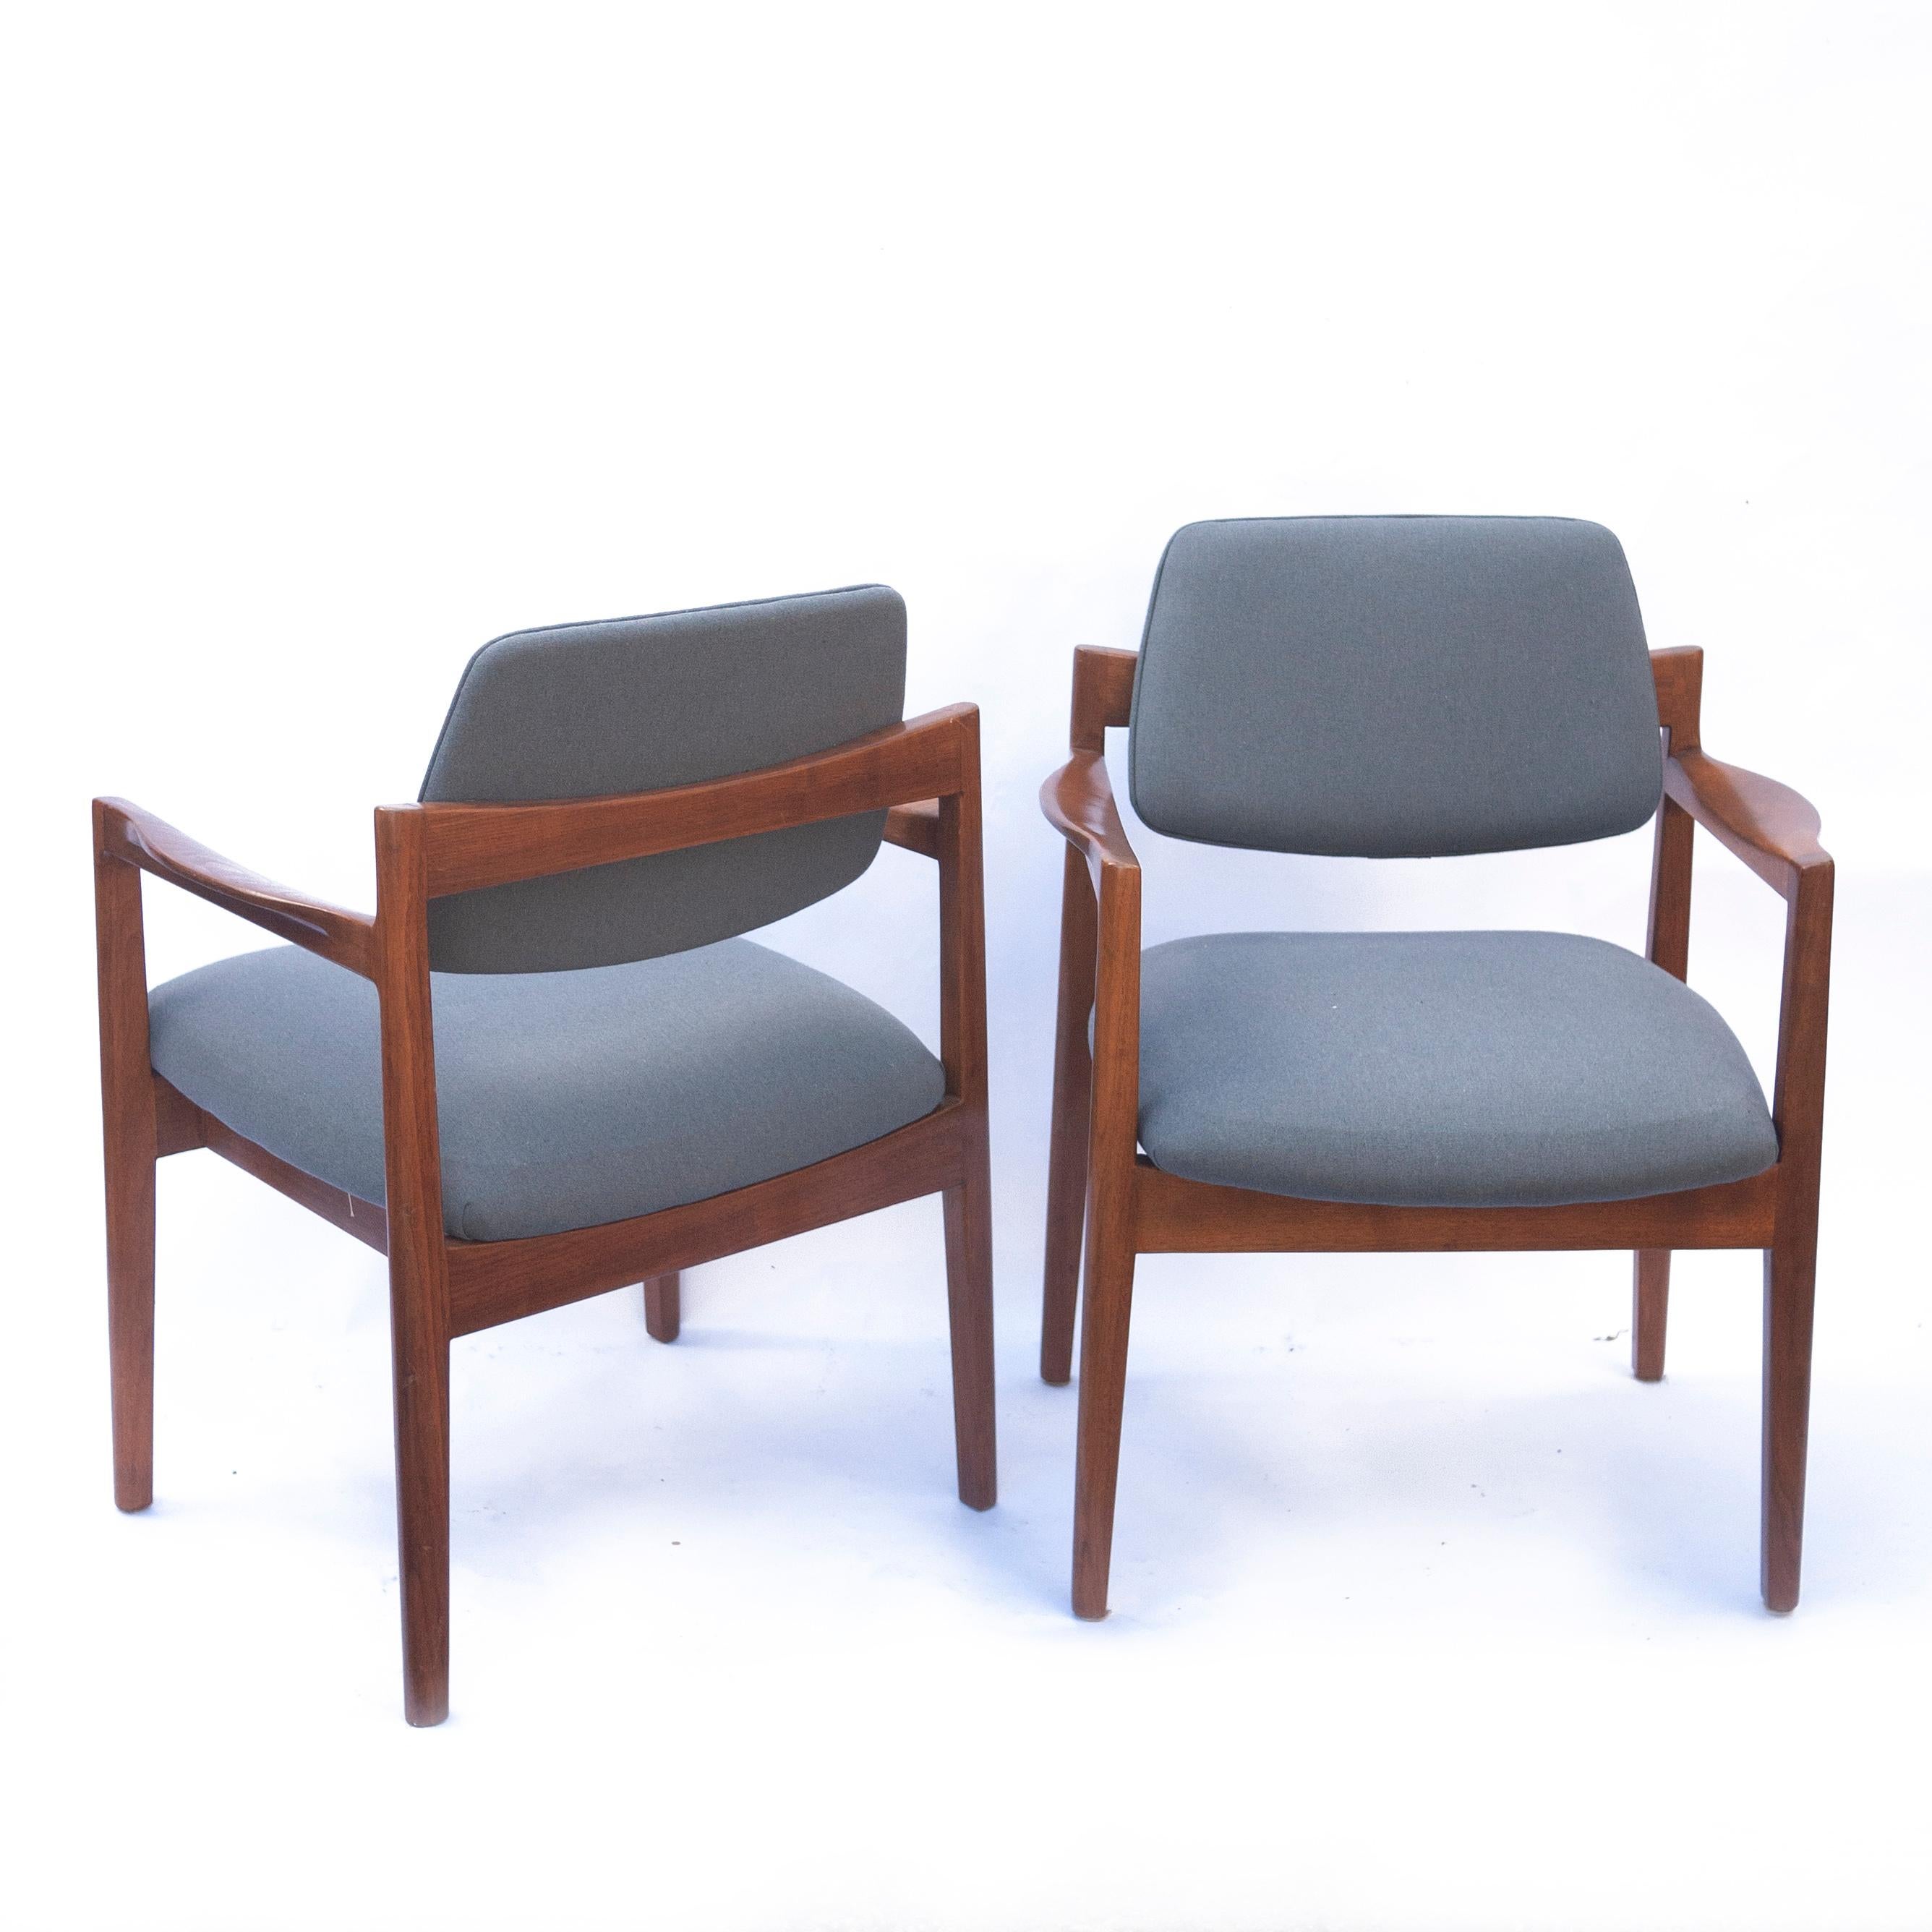 Pair of Arm Chairs by Jens Risom for Knoll in Walnut and Newly Upholstered  For Sale 2